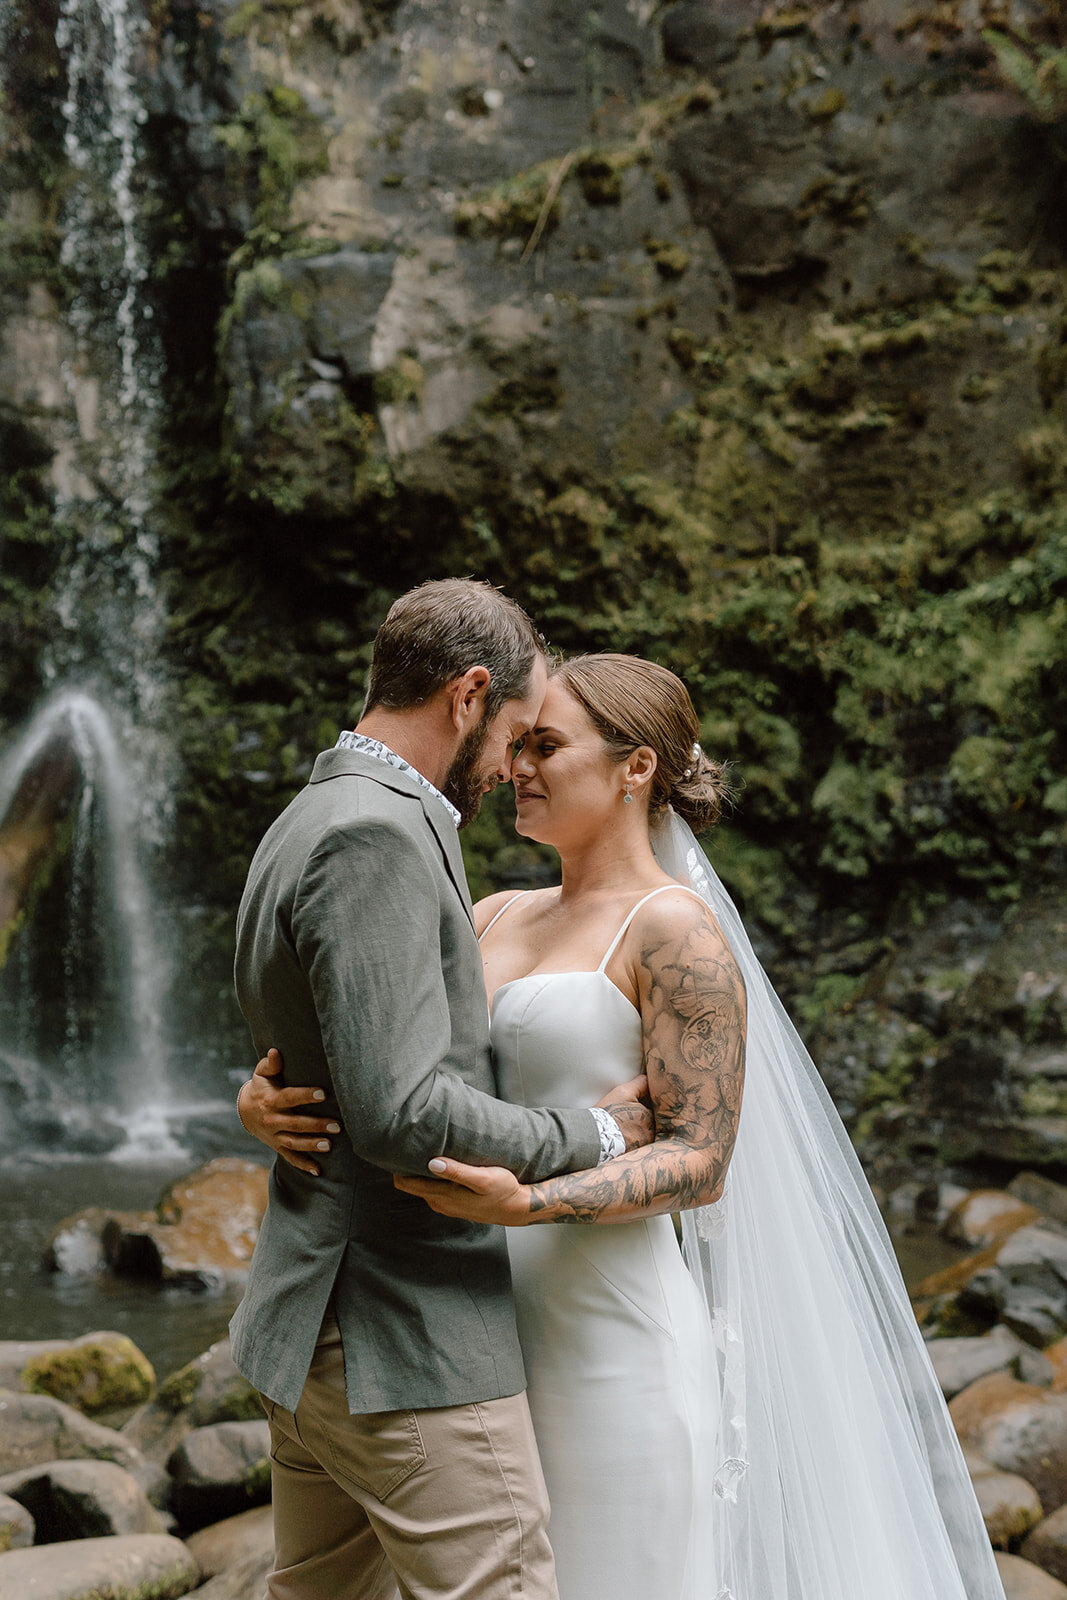 Stacey&Cory-Coast&Pines-273